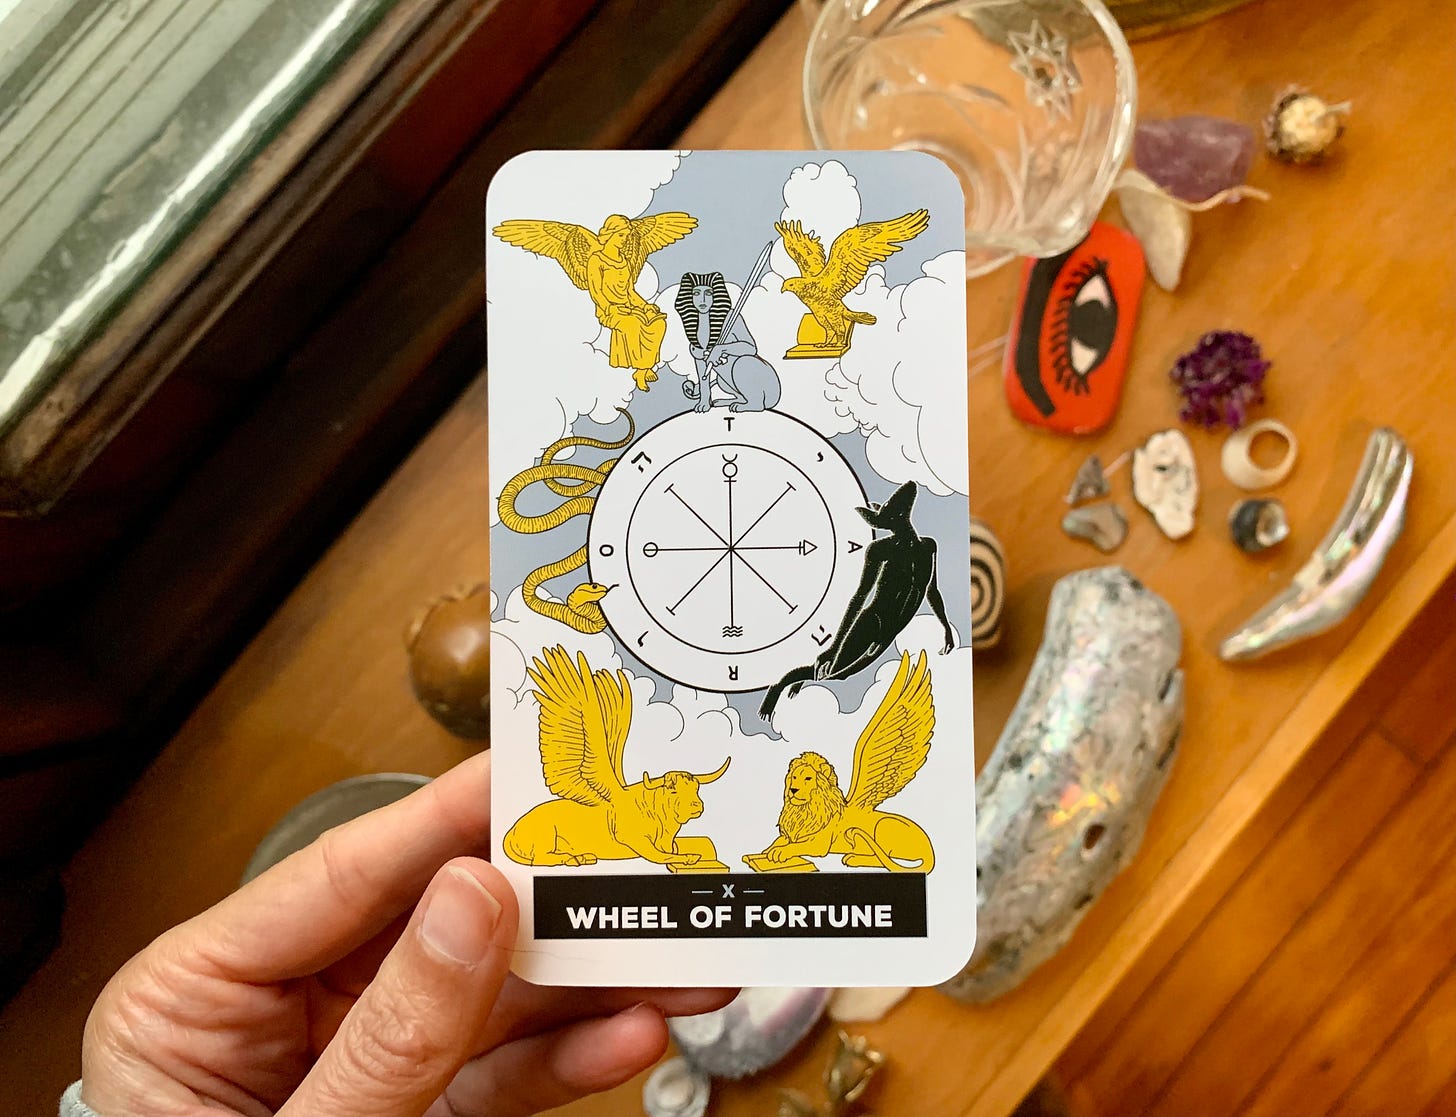 A hand is holding a tarot card, Wheel of Fortune by Xaviera Lopez for The Change Tarot. In the image, there is a wheel with a snake on one side and a demon on the other. There is a sphinx holding a sword at the top. On each corner of the card are four winged beings, a human, eagle, lion and bull. Behind the card is a wooden shelf with various objects on it including shells, fried flowers and talismans.